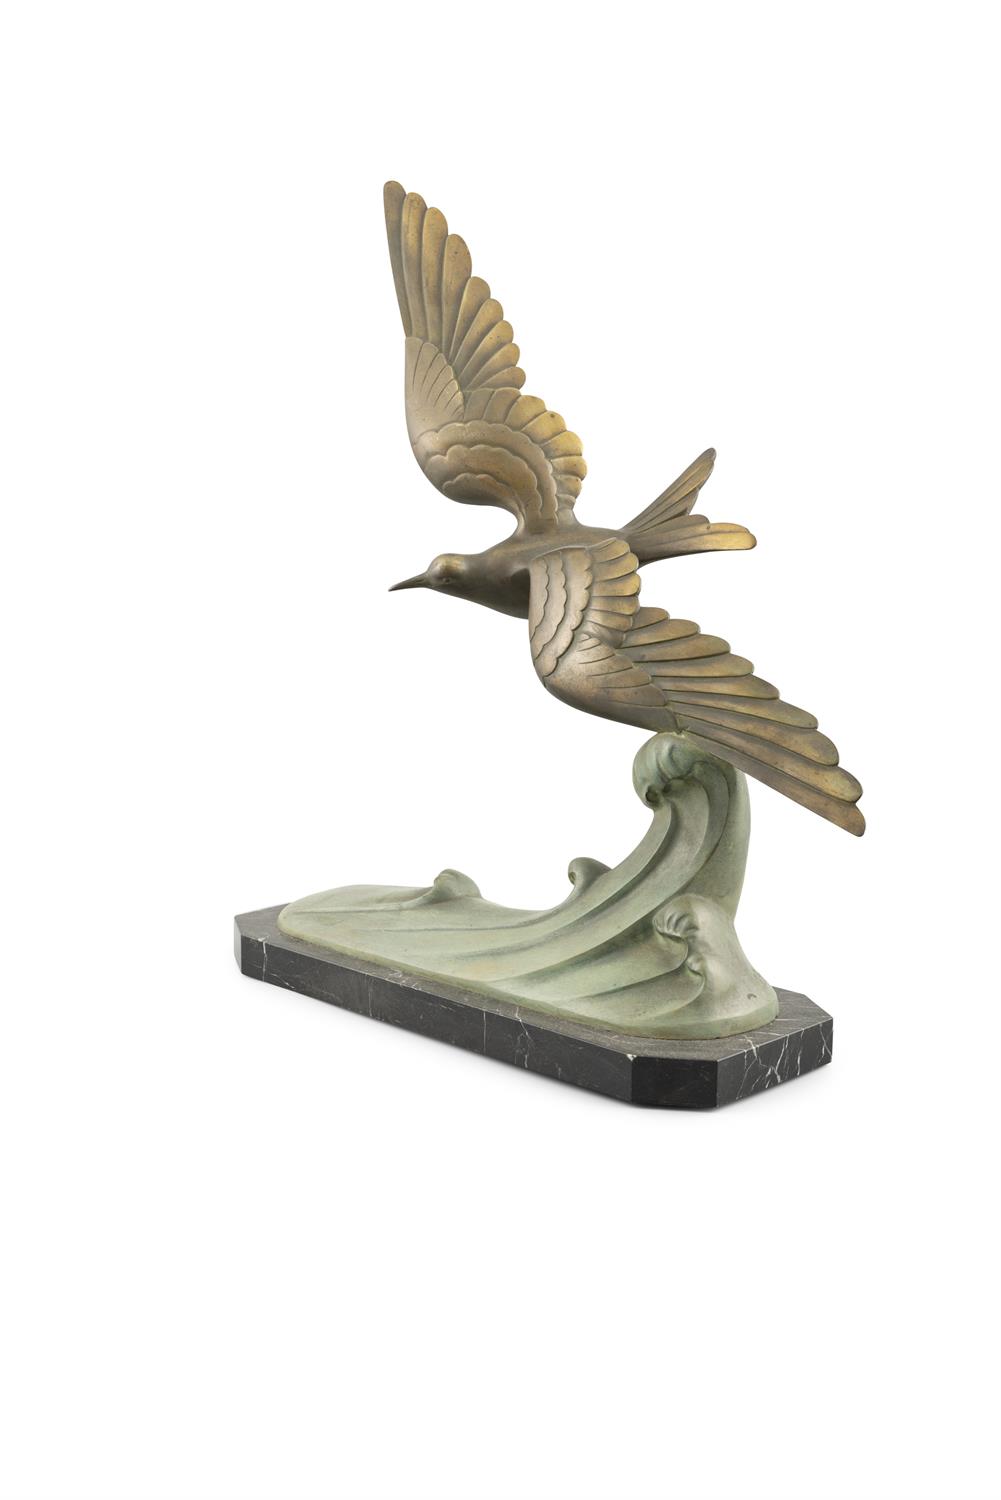 J. BRAULT, French 20th Century Crest of a Wave, Bronze model of a seagull, 59 x 46cm Signed on - Image 2 of 4